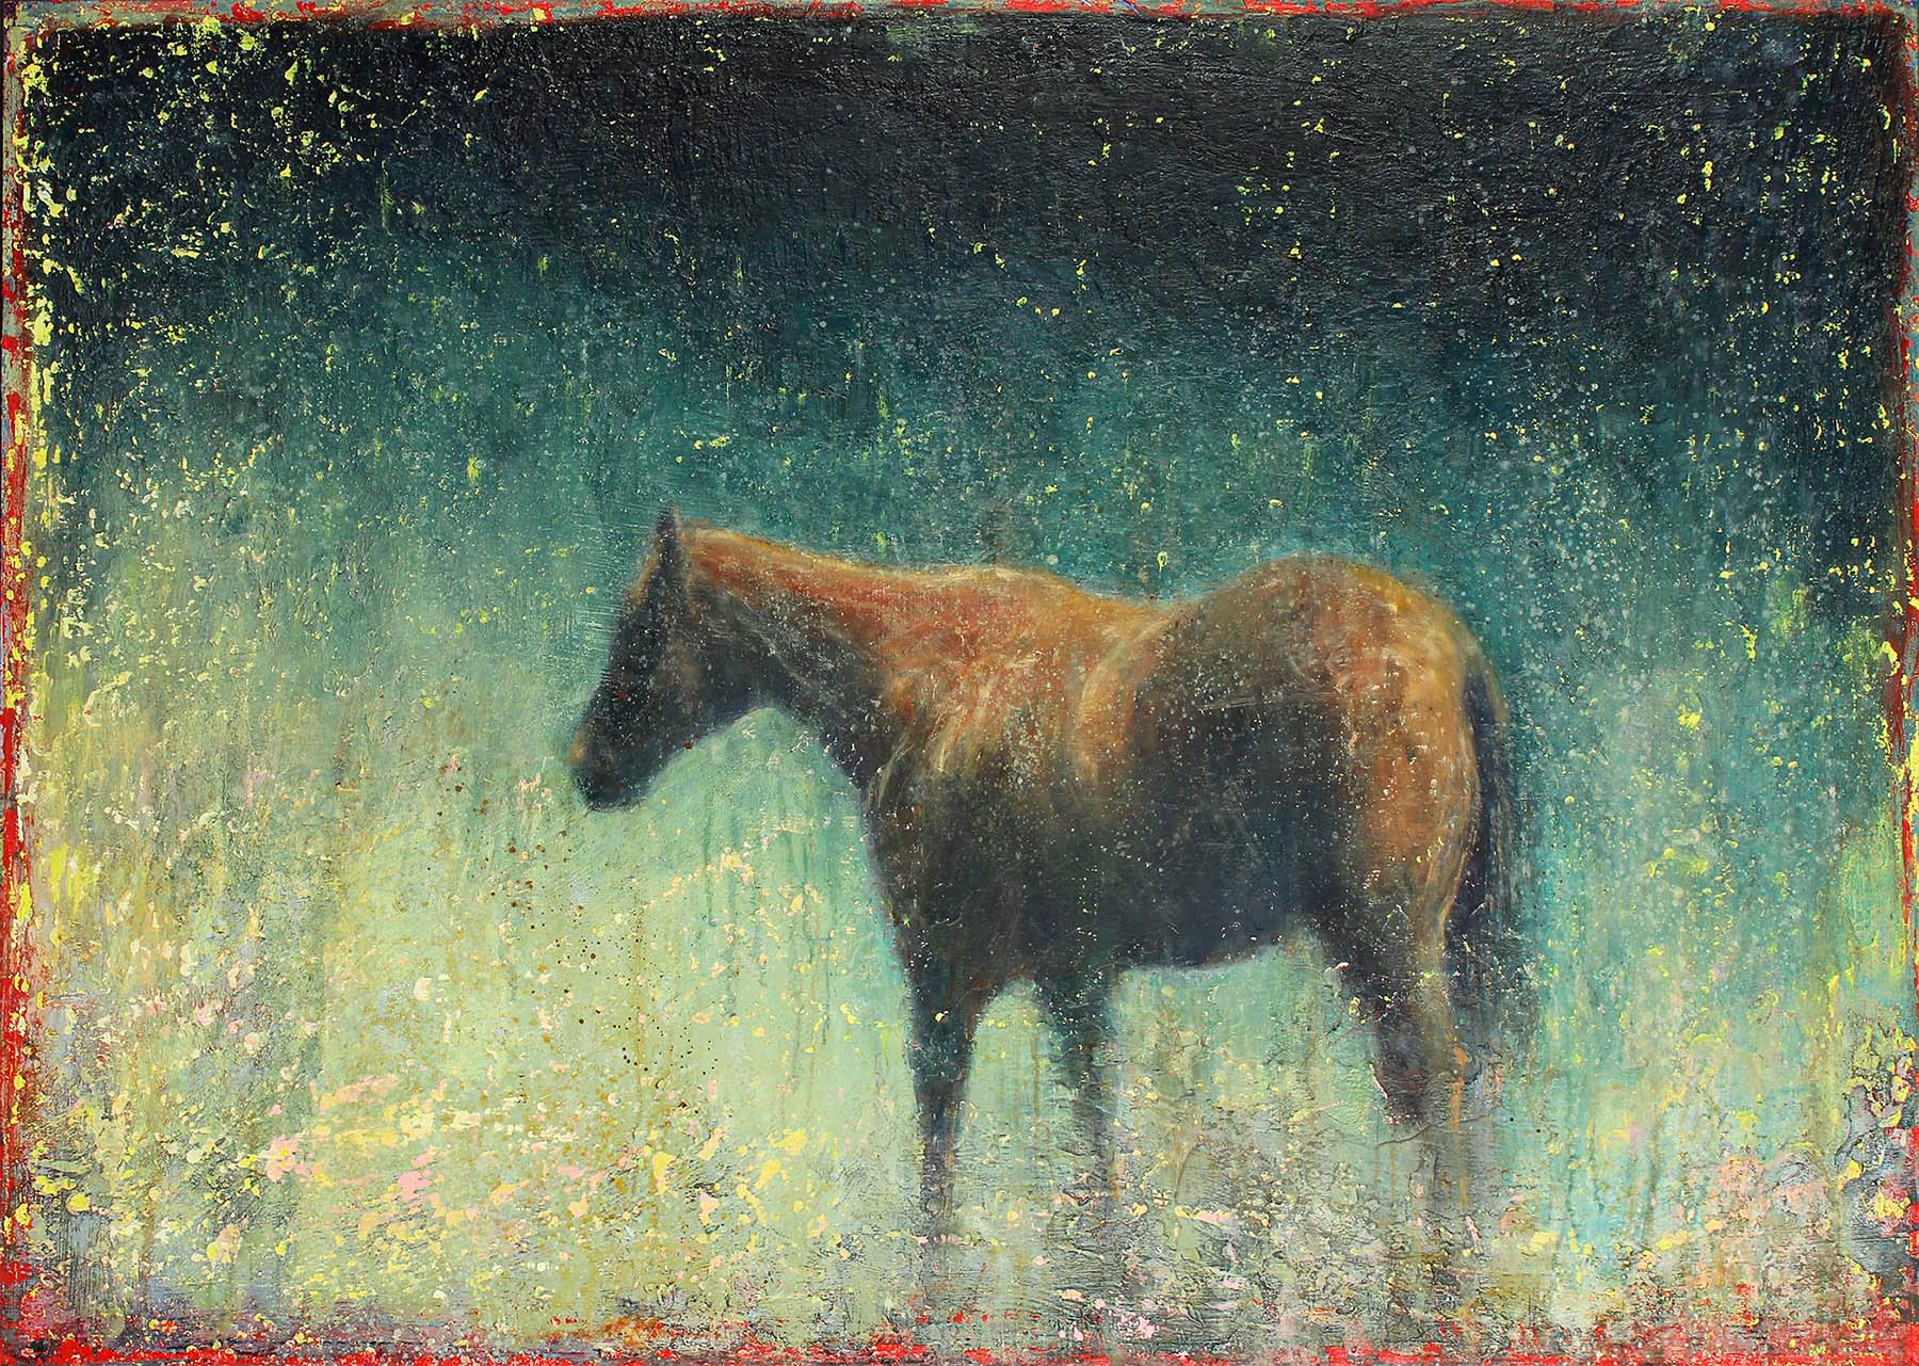 A Mixed Media Painting Of A Horse Standing In A Colorful Rainstorm By Matt Flint At Gallery Wild